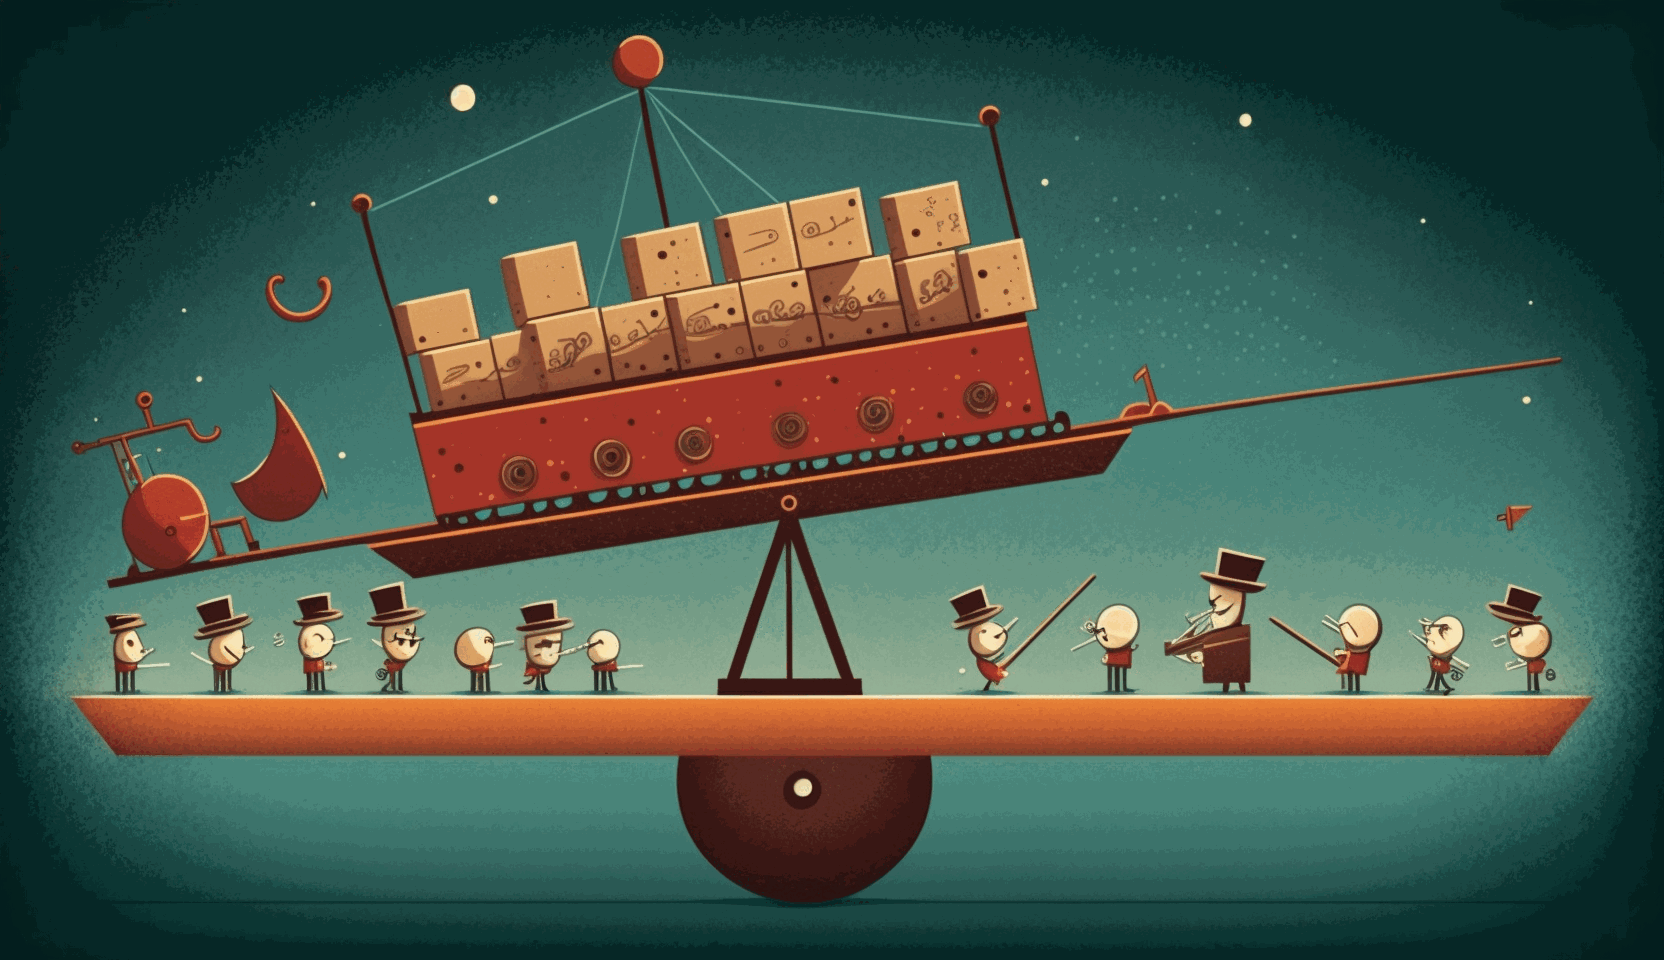 A cartoonish image depicting containers sharing equal weight on a seesaw with an orchestra conductor directing them 